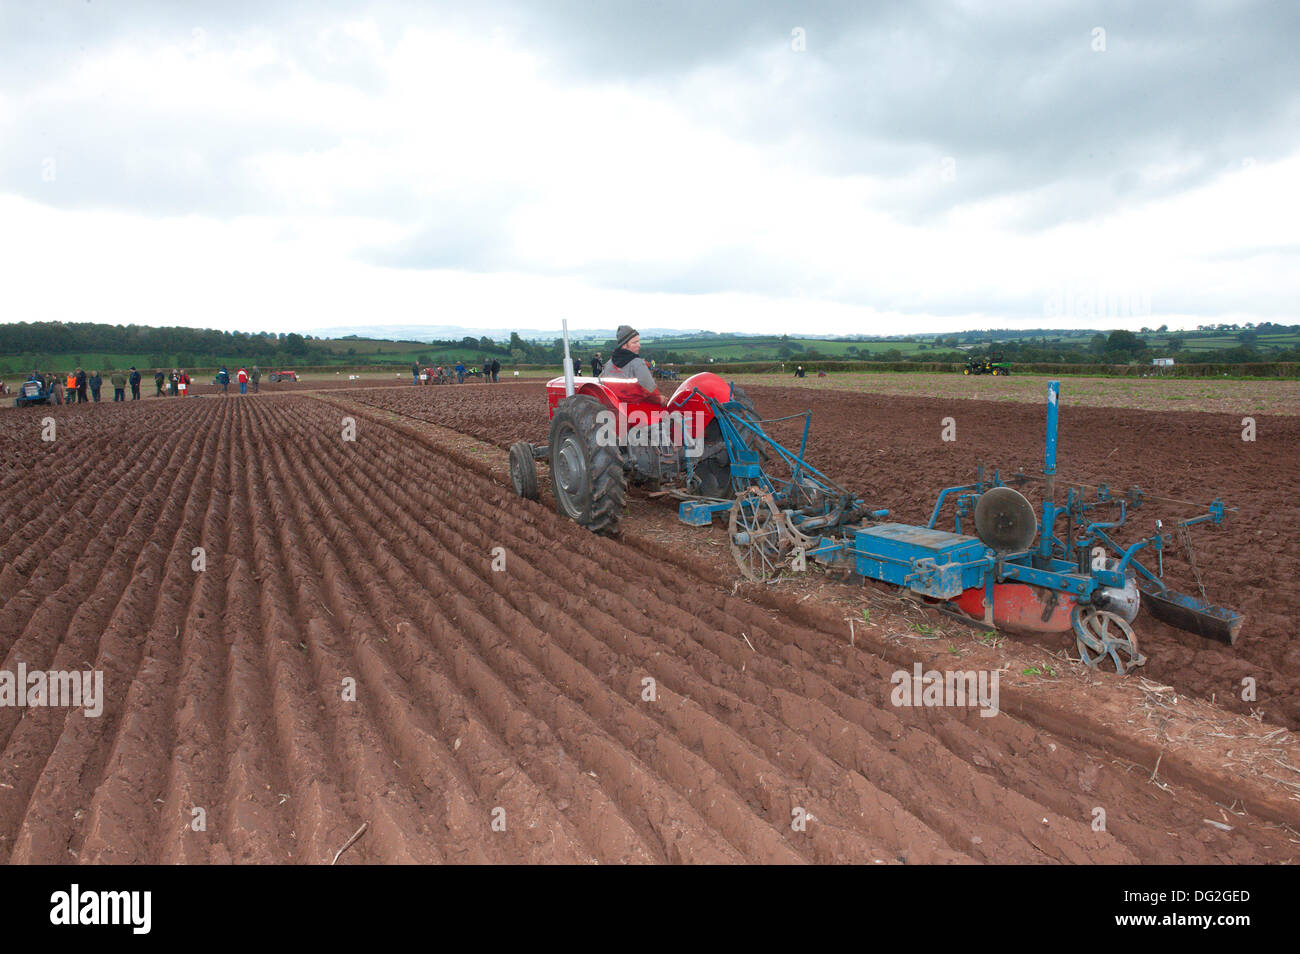 Llanwarne, Herefordshire, UK. 12th October 2013. Contestants take part in the Class 5 Oat Seed Furrow Ploughing event. More than 230 top British ploughmen compete in the 2013 British National Ploughing Championships which have returned to Herefordshire for the first time in 27 years. The top ploughmen of  each class (reversible and conventional) will represent Britain at the World Ploughing Championships to be held in France in 2014. Photo credit: Graham M. Lawrence/Alamy Live News. Stock Photo